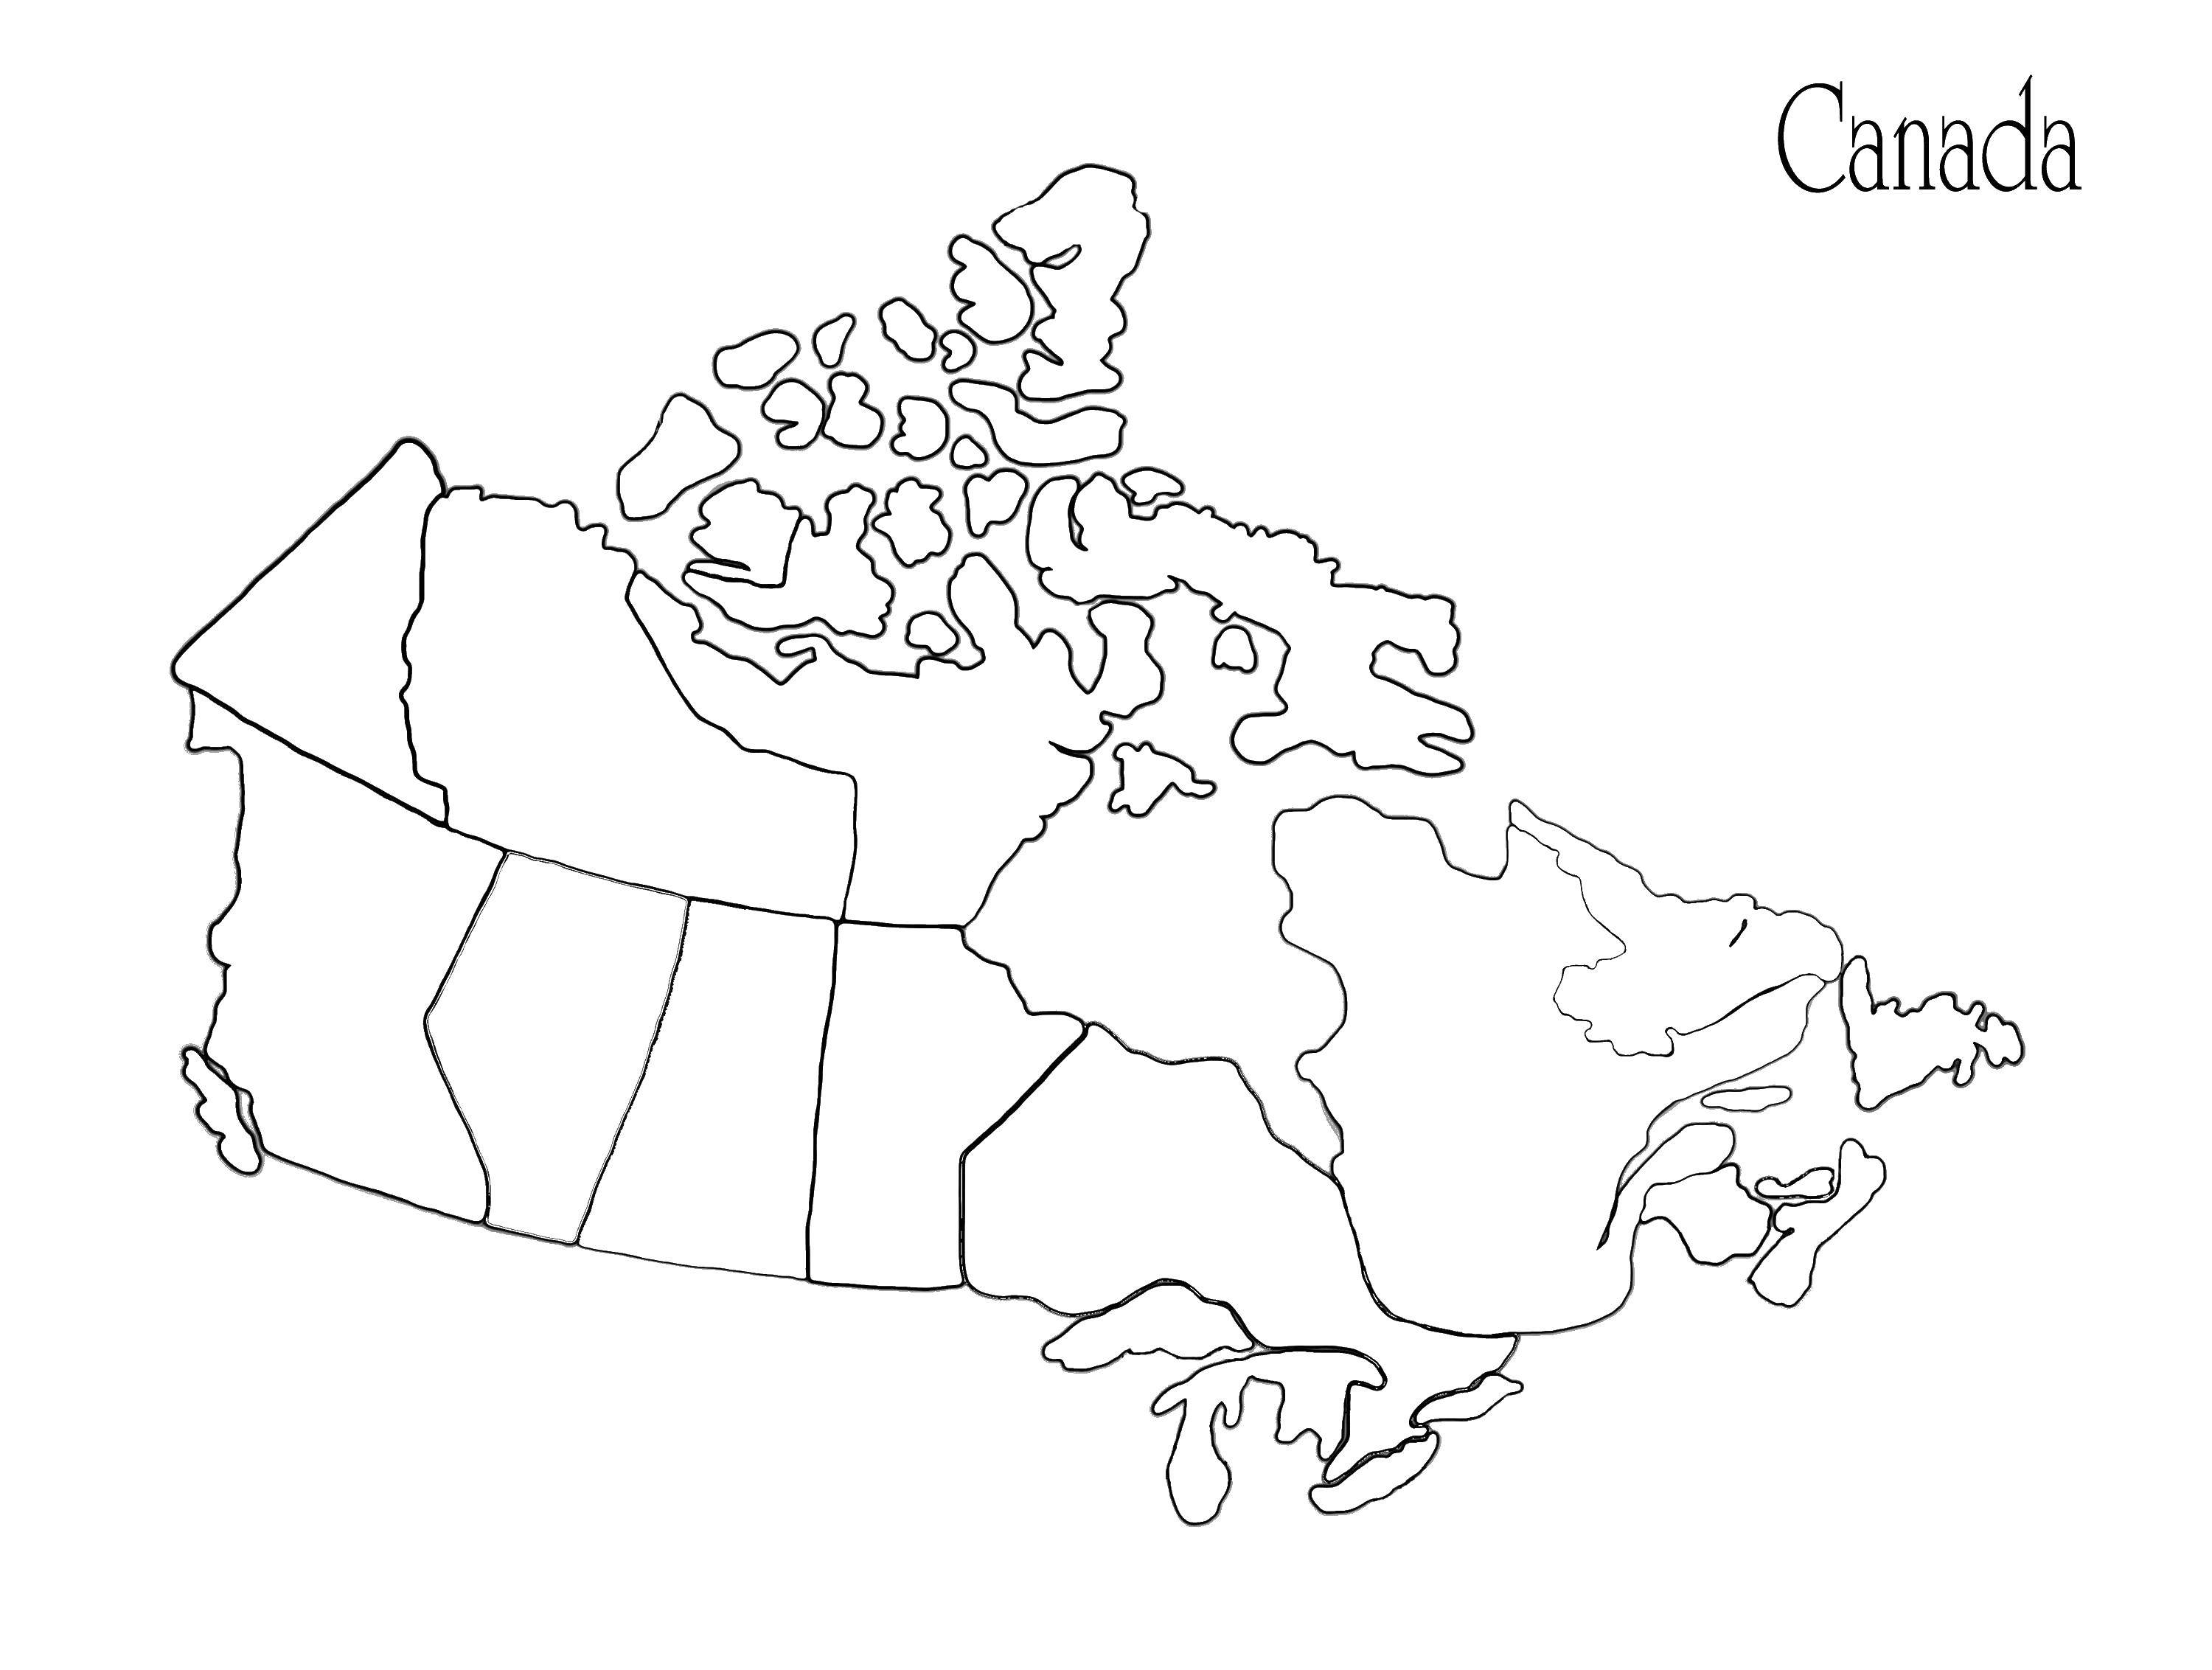 Coloring Canada map. Category Maps. Tags:  maps, Canada.